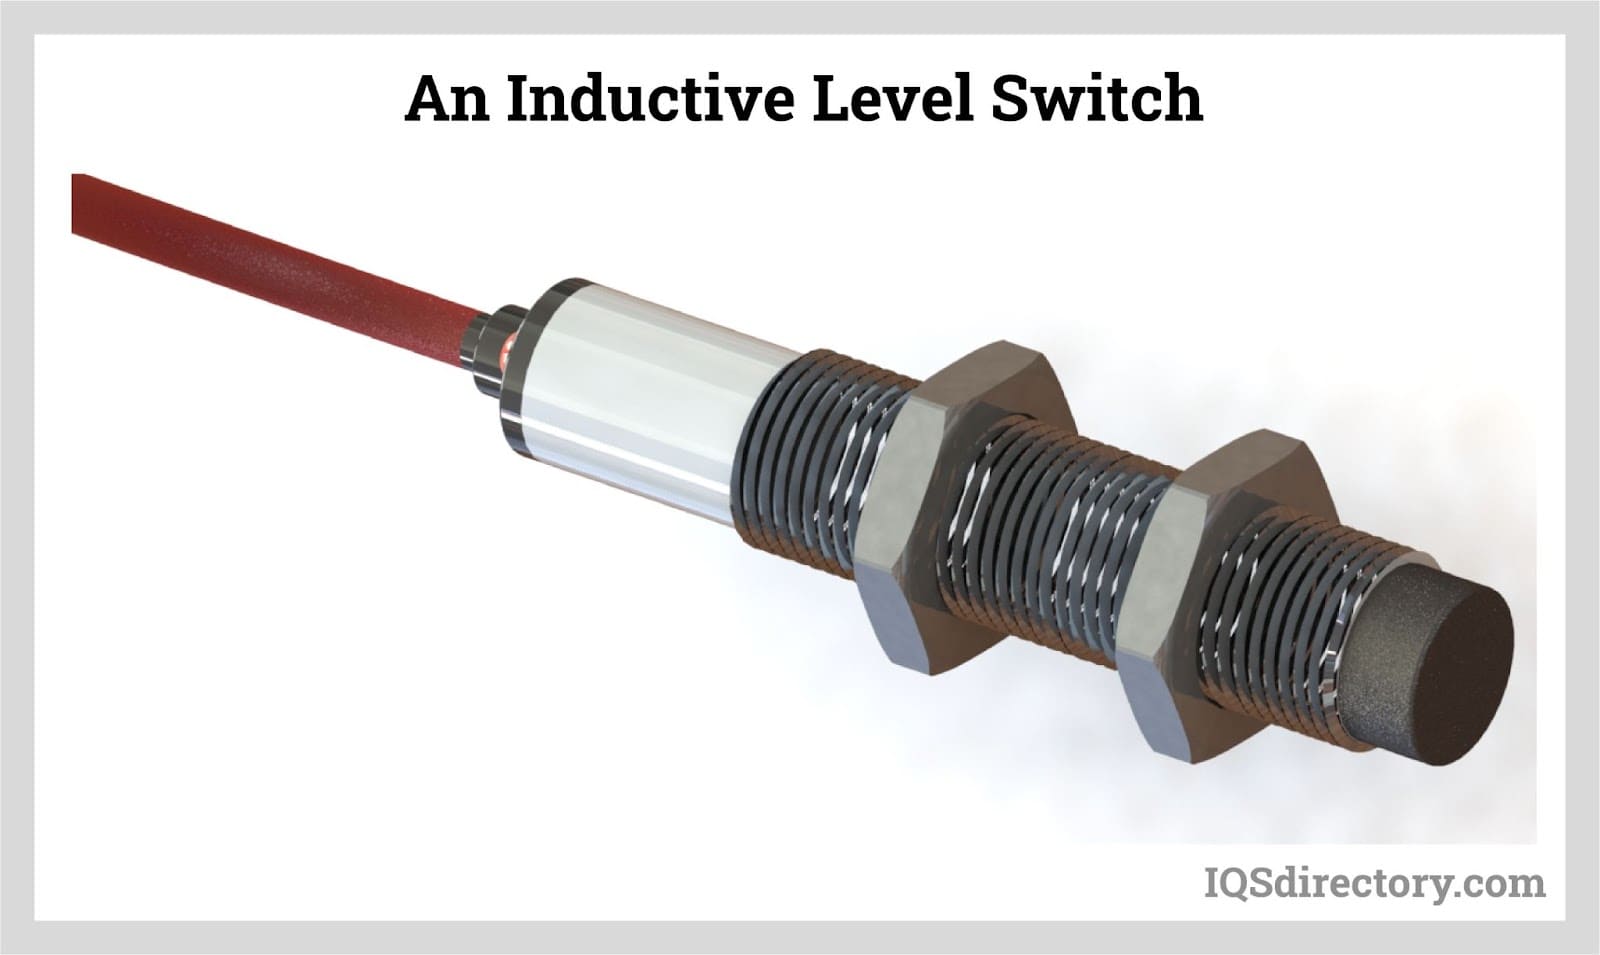 An Inductive Level Switch